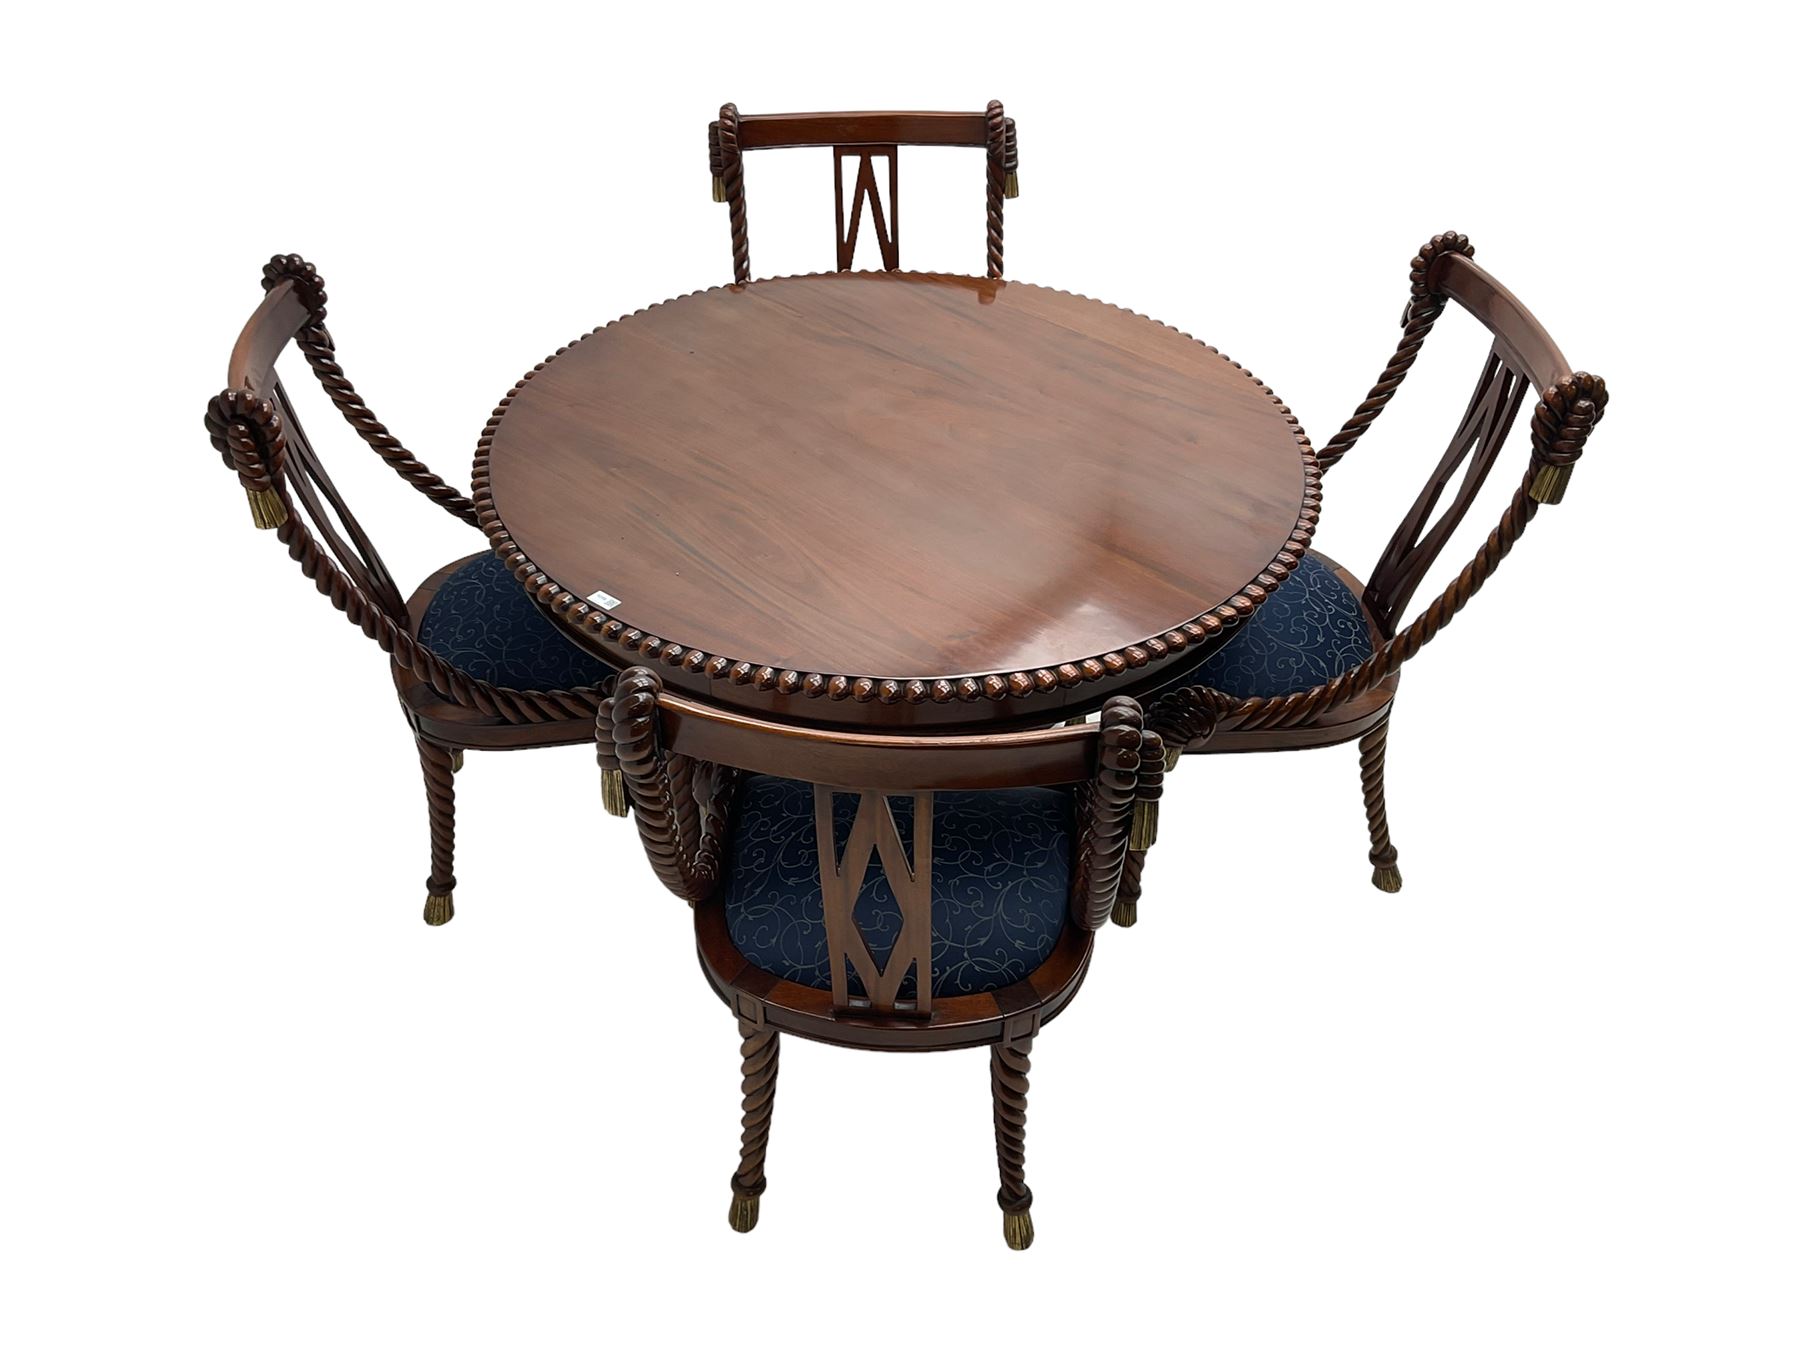 Regency style dining set - the table with circular tilt-top on turned and carved column - Image 6 of 6